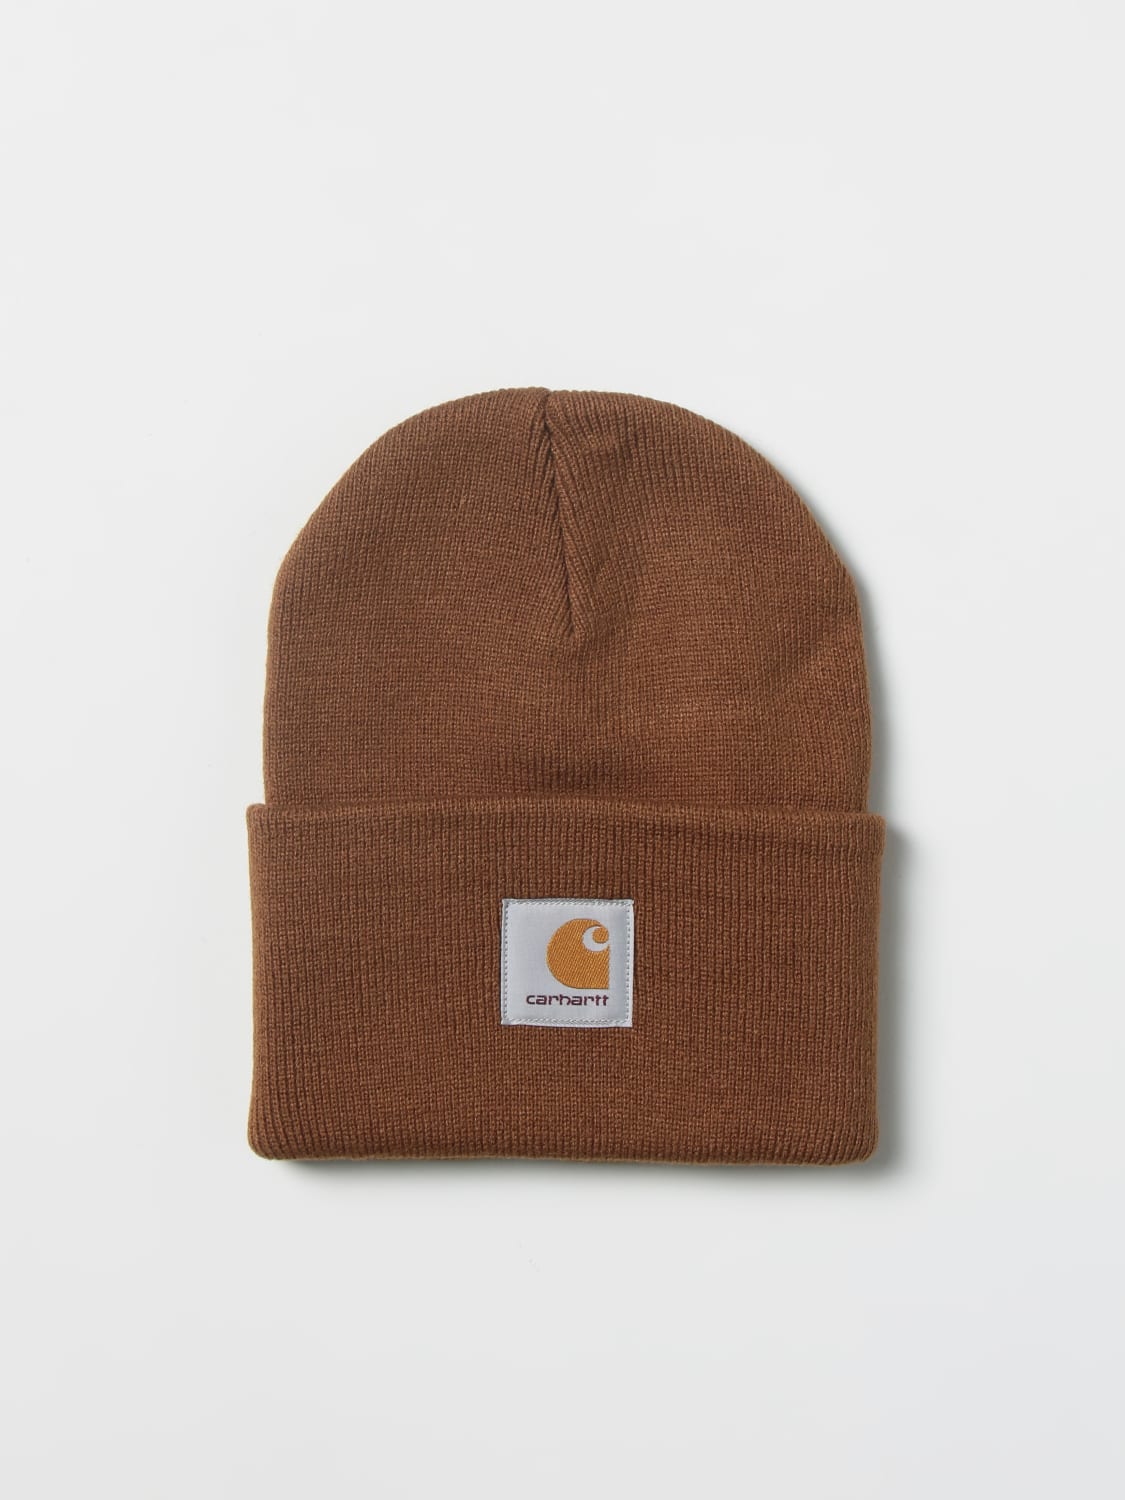 Carhartt Wip Outlet: Cappello Carhartt in maglia a costine